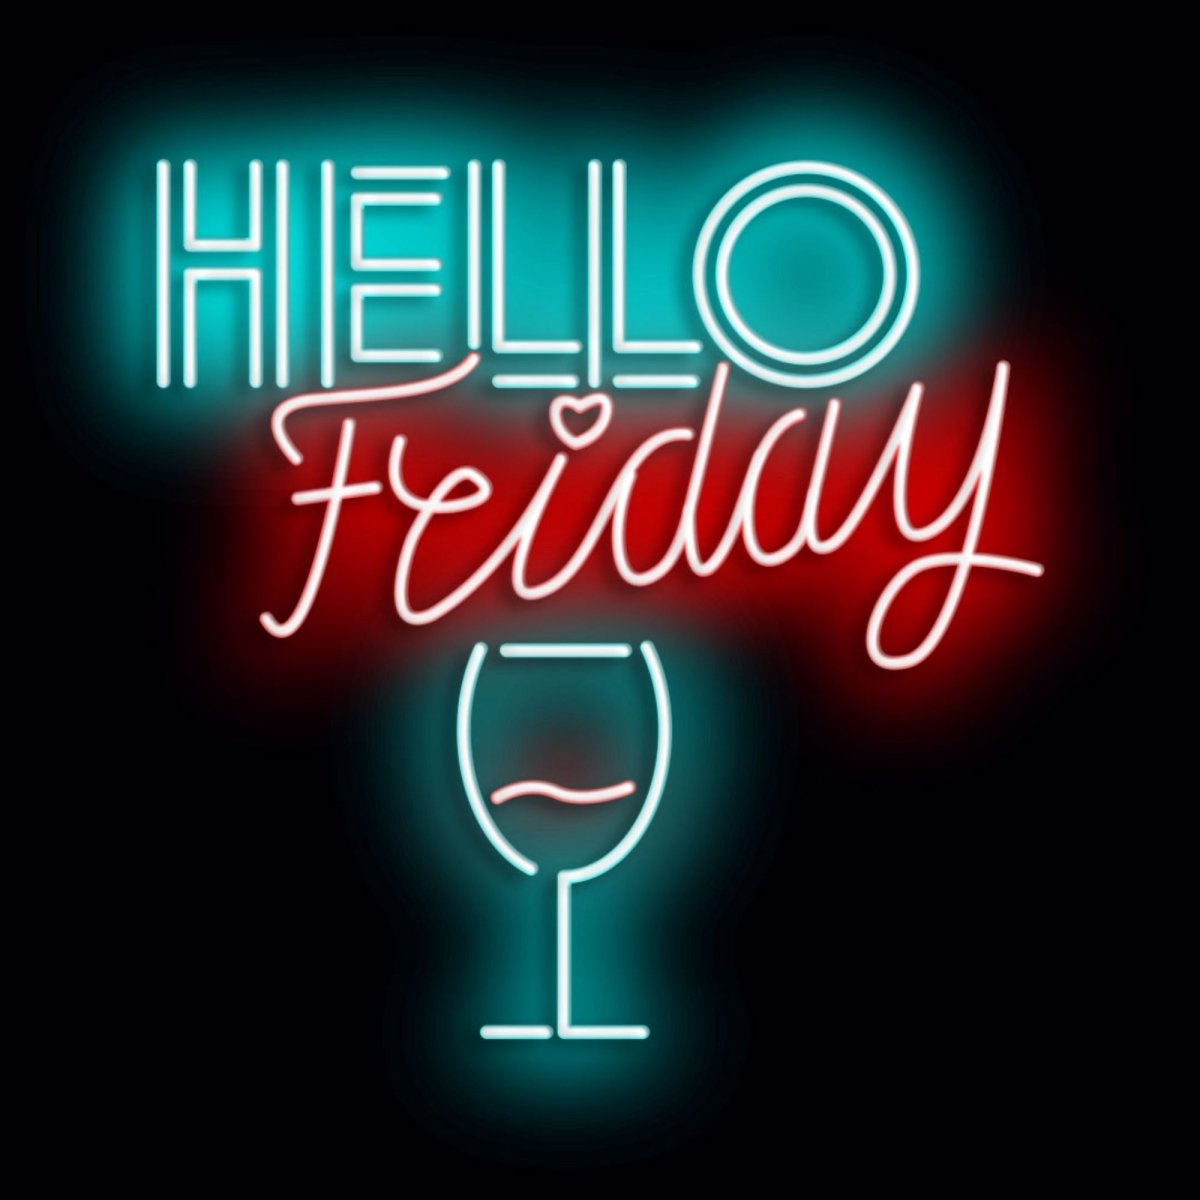 Personalised LED Neon Sign HELLO FRIDAY - madaboutneon